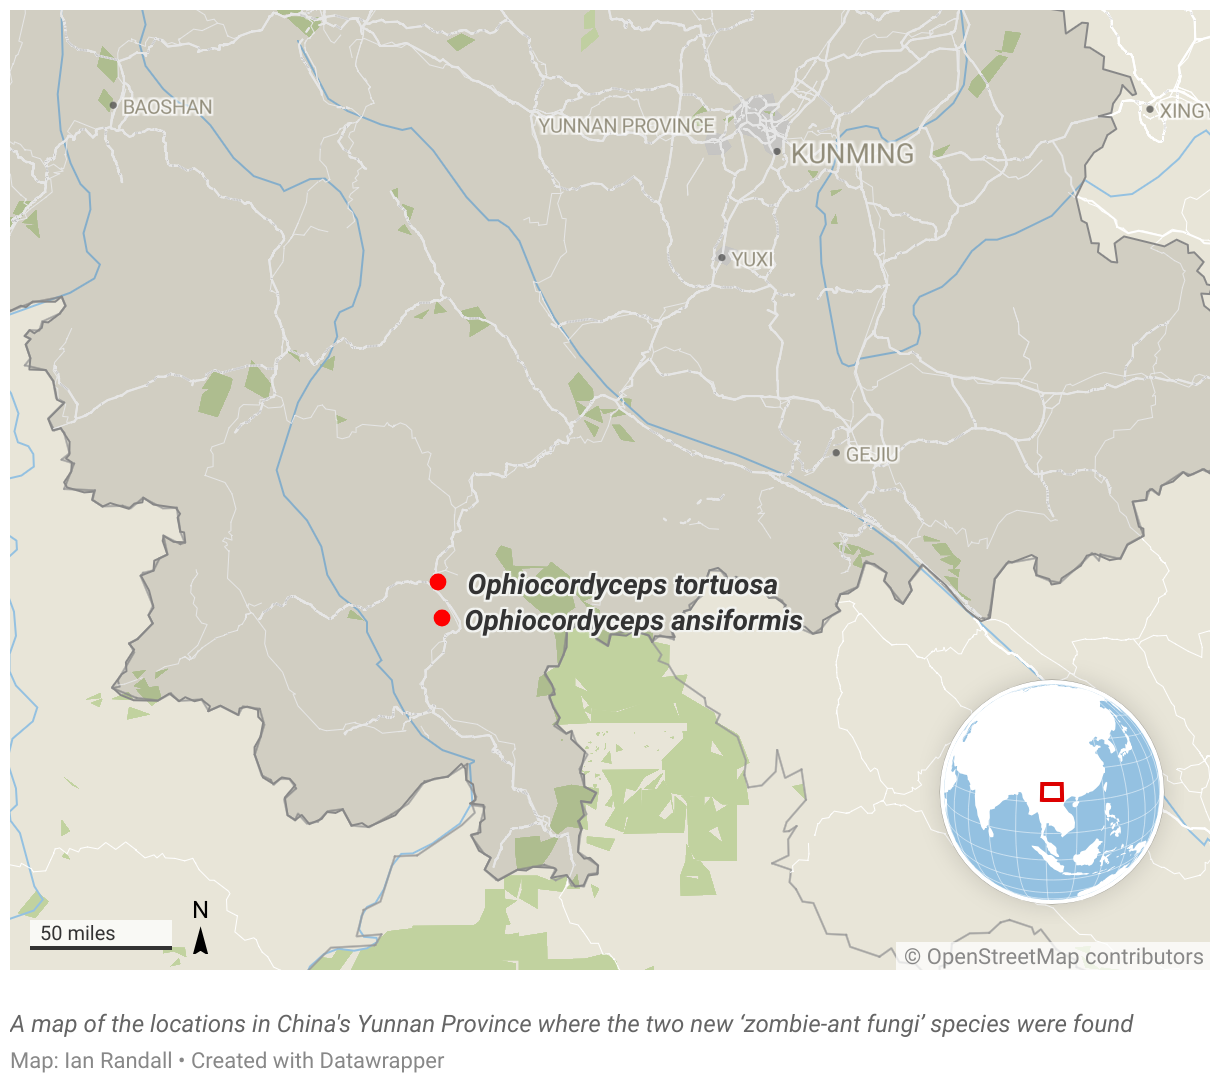 A map of the locations in China's Yunnan Province where the two new ‘zombie-ant fungi’ species were found